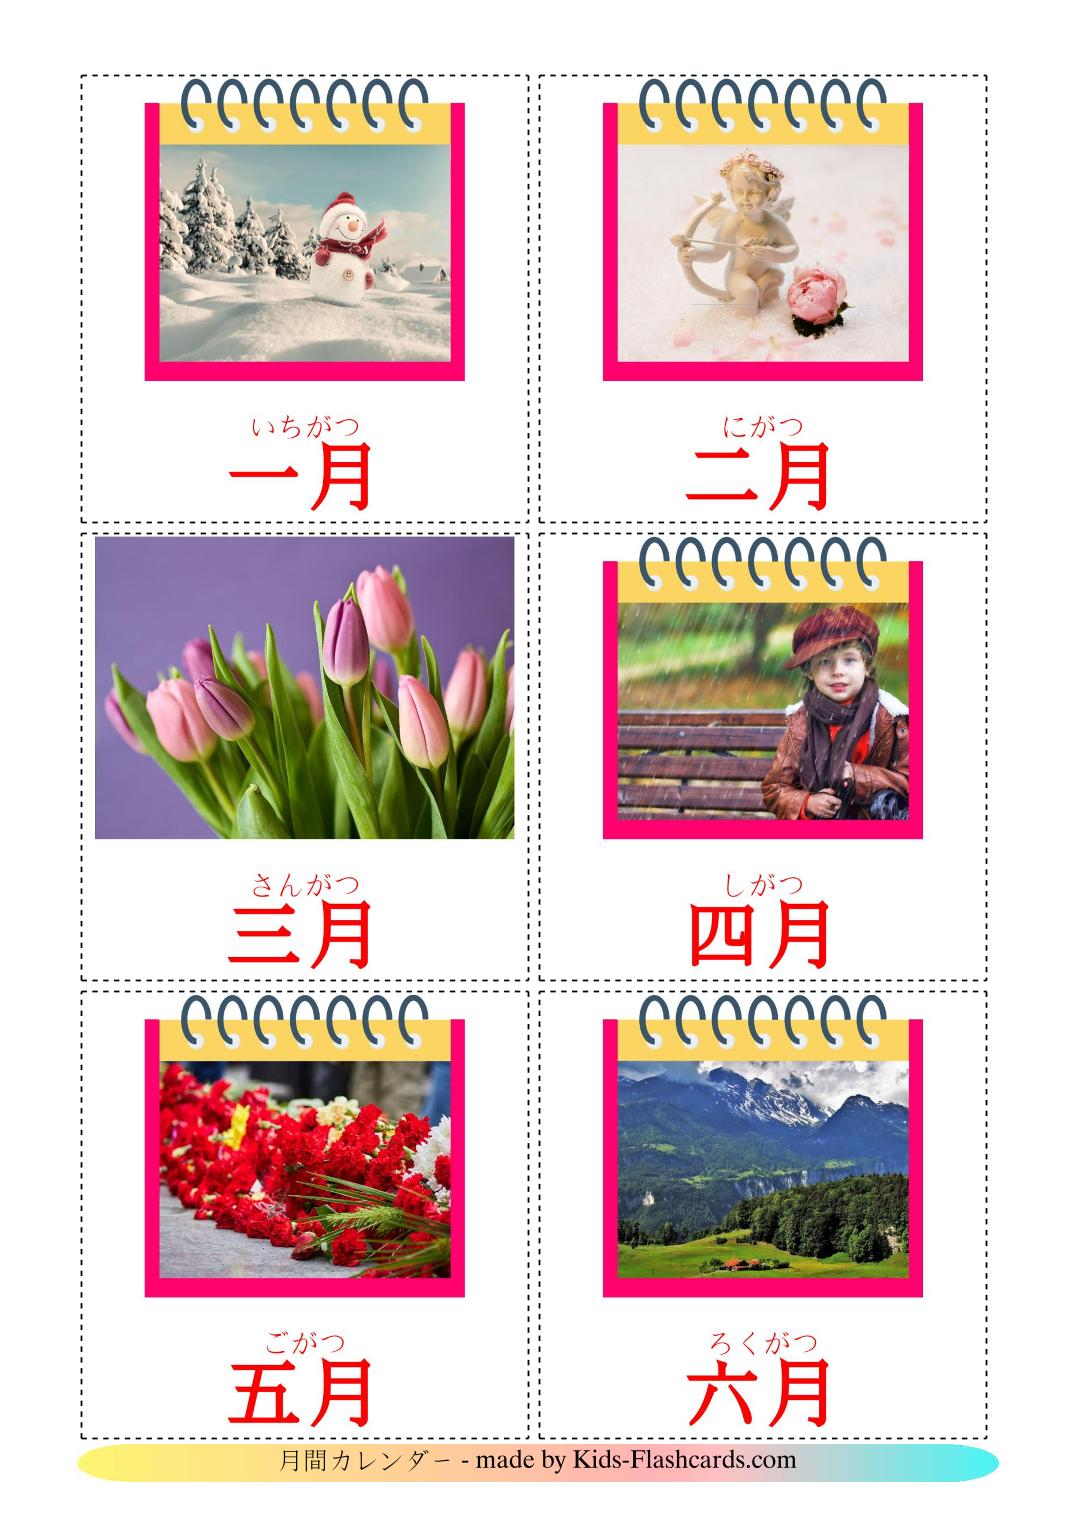 Months of the Year - 12 Free Printable japanese Flashcards 